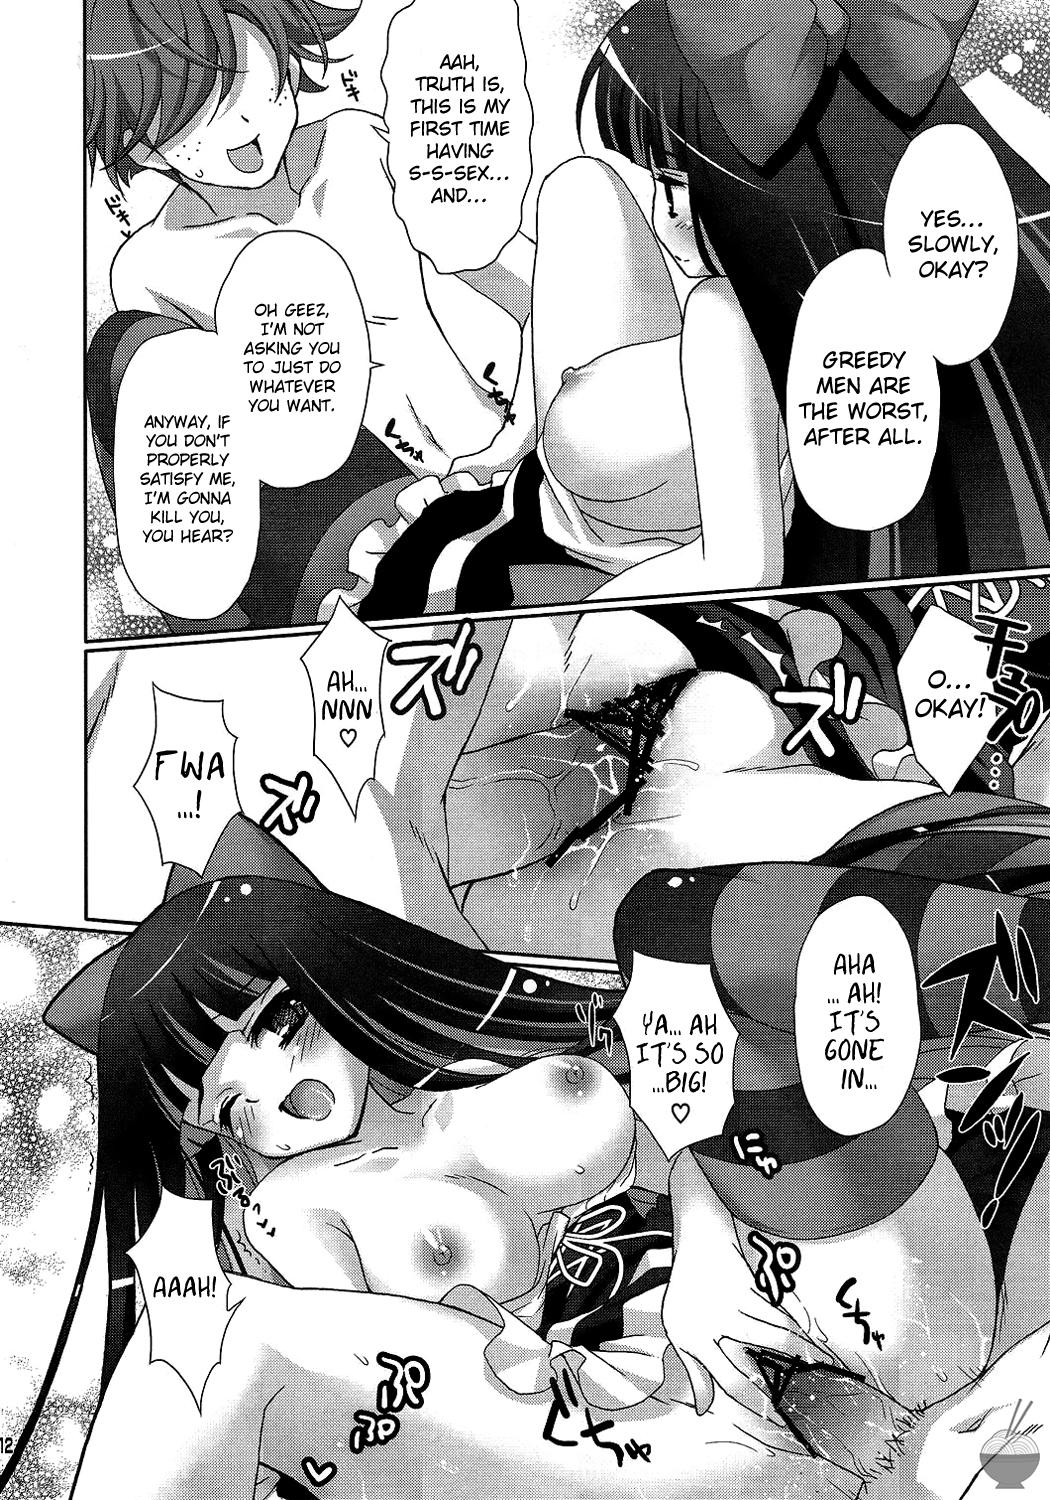 Model Goth Loli wo Kita Tenshi | The Angel Wears Gothic Lolita - Panty and stocking with garterbelt Storyline - Page 12